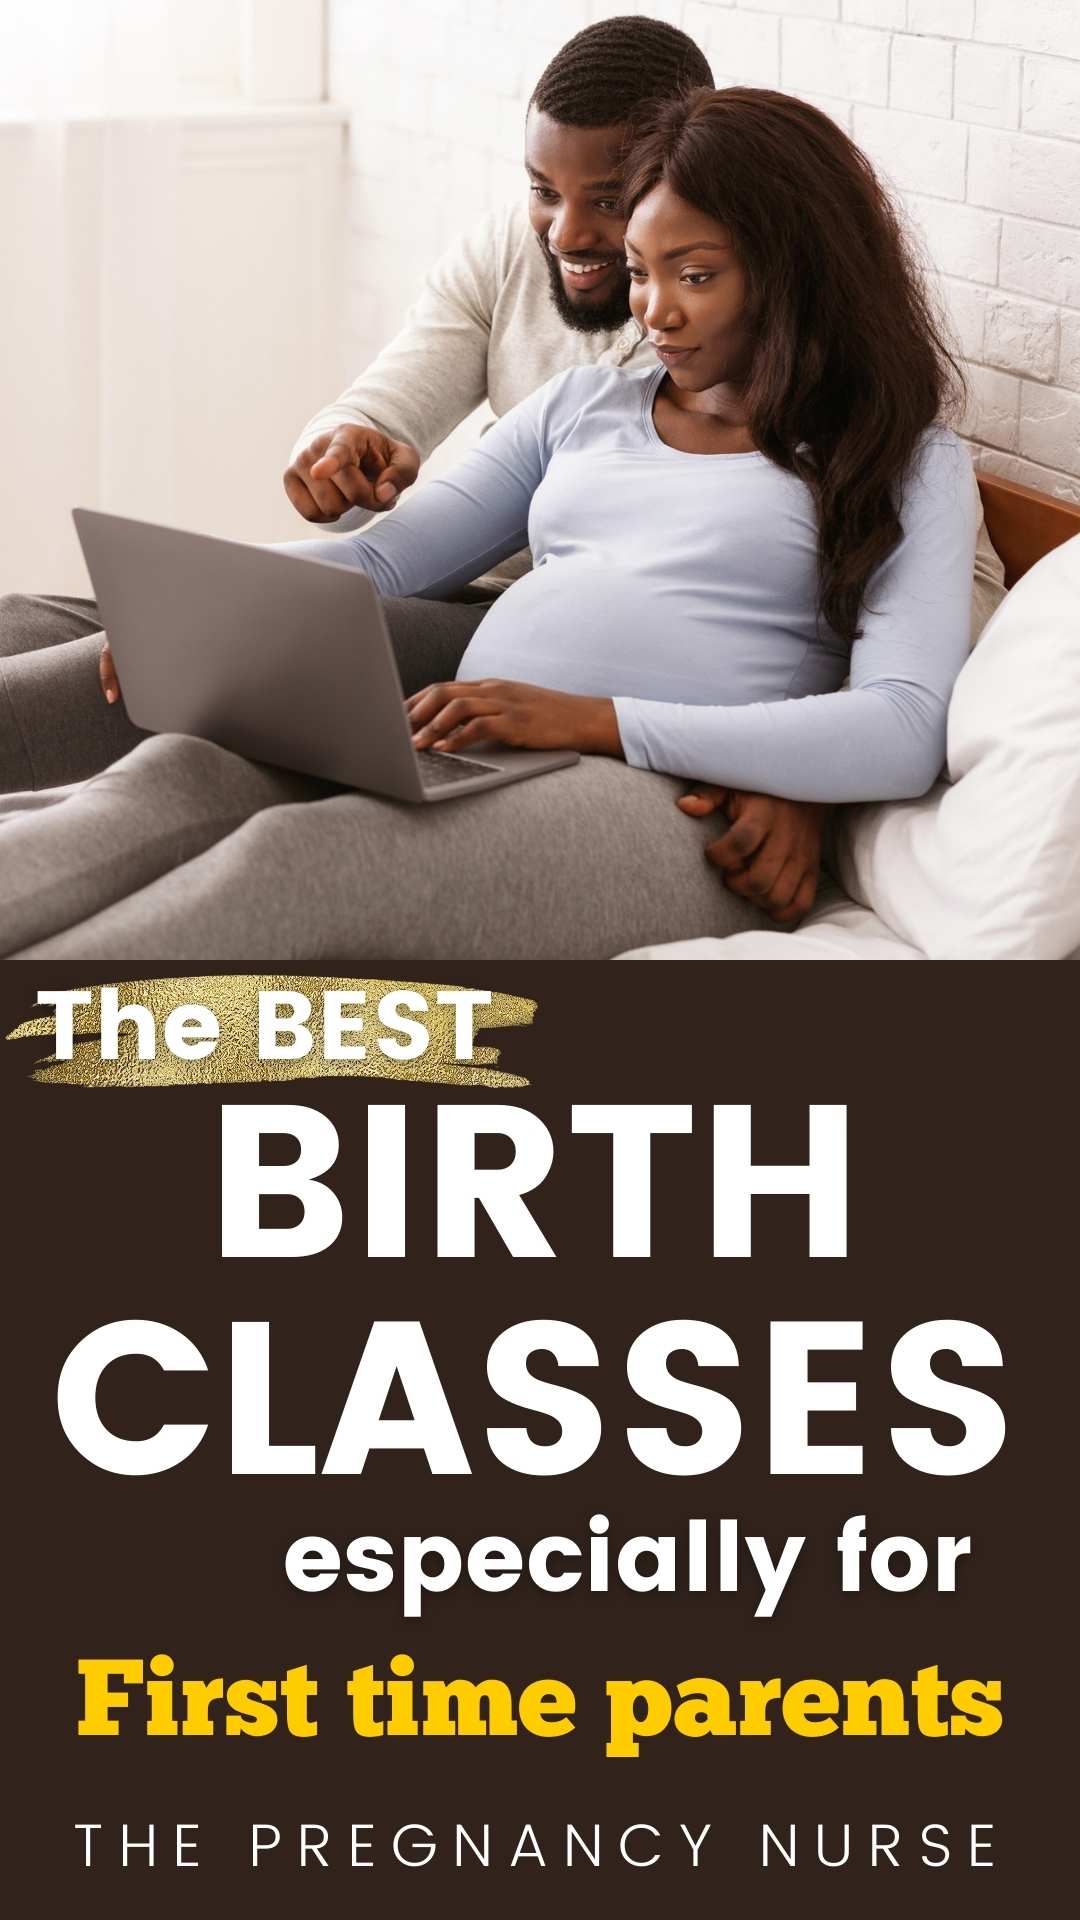 Childbirth is a new experience. Can online birthing classes beat in-person classes, and which are the BEST online prenatal classes out there for first time parents?